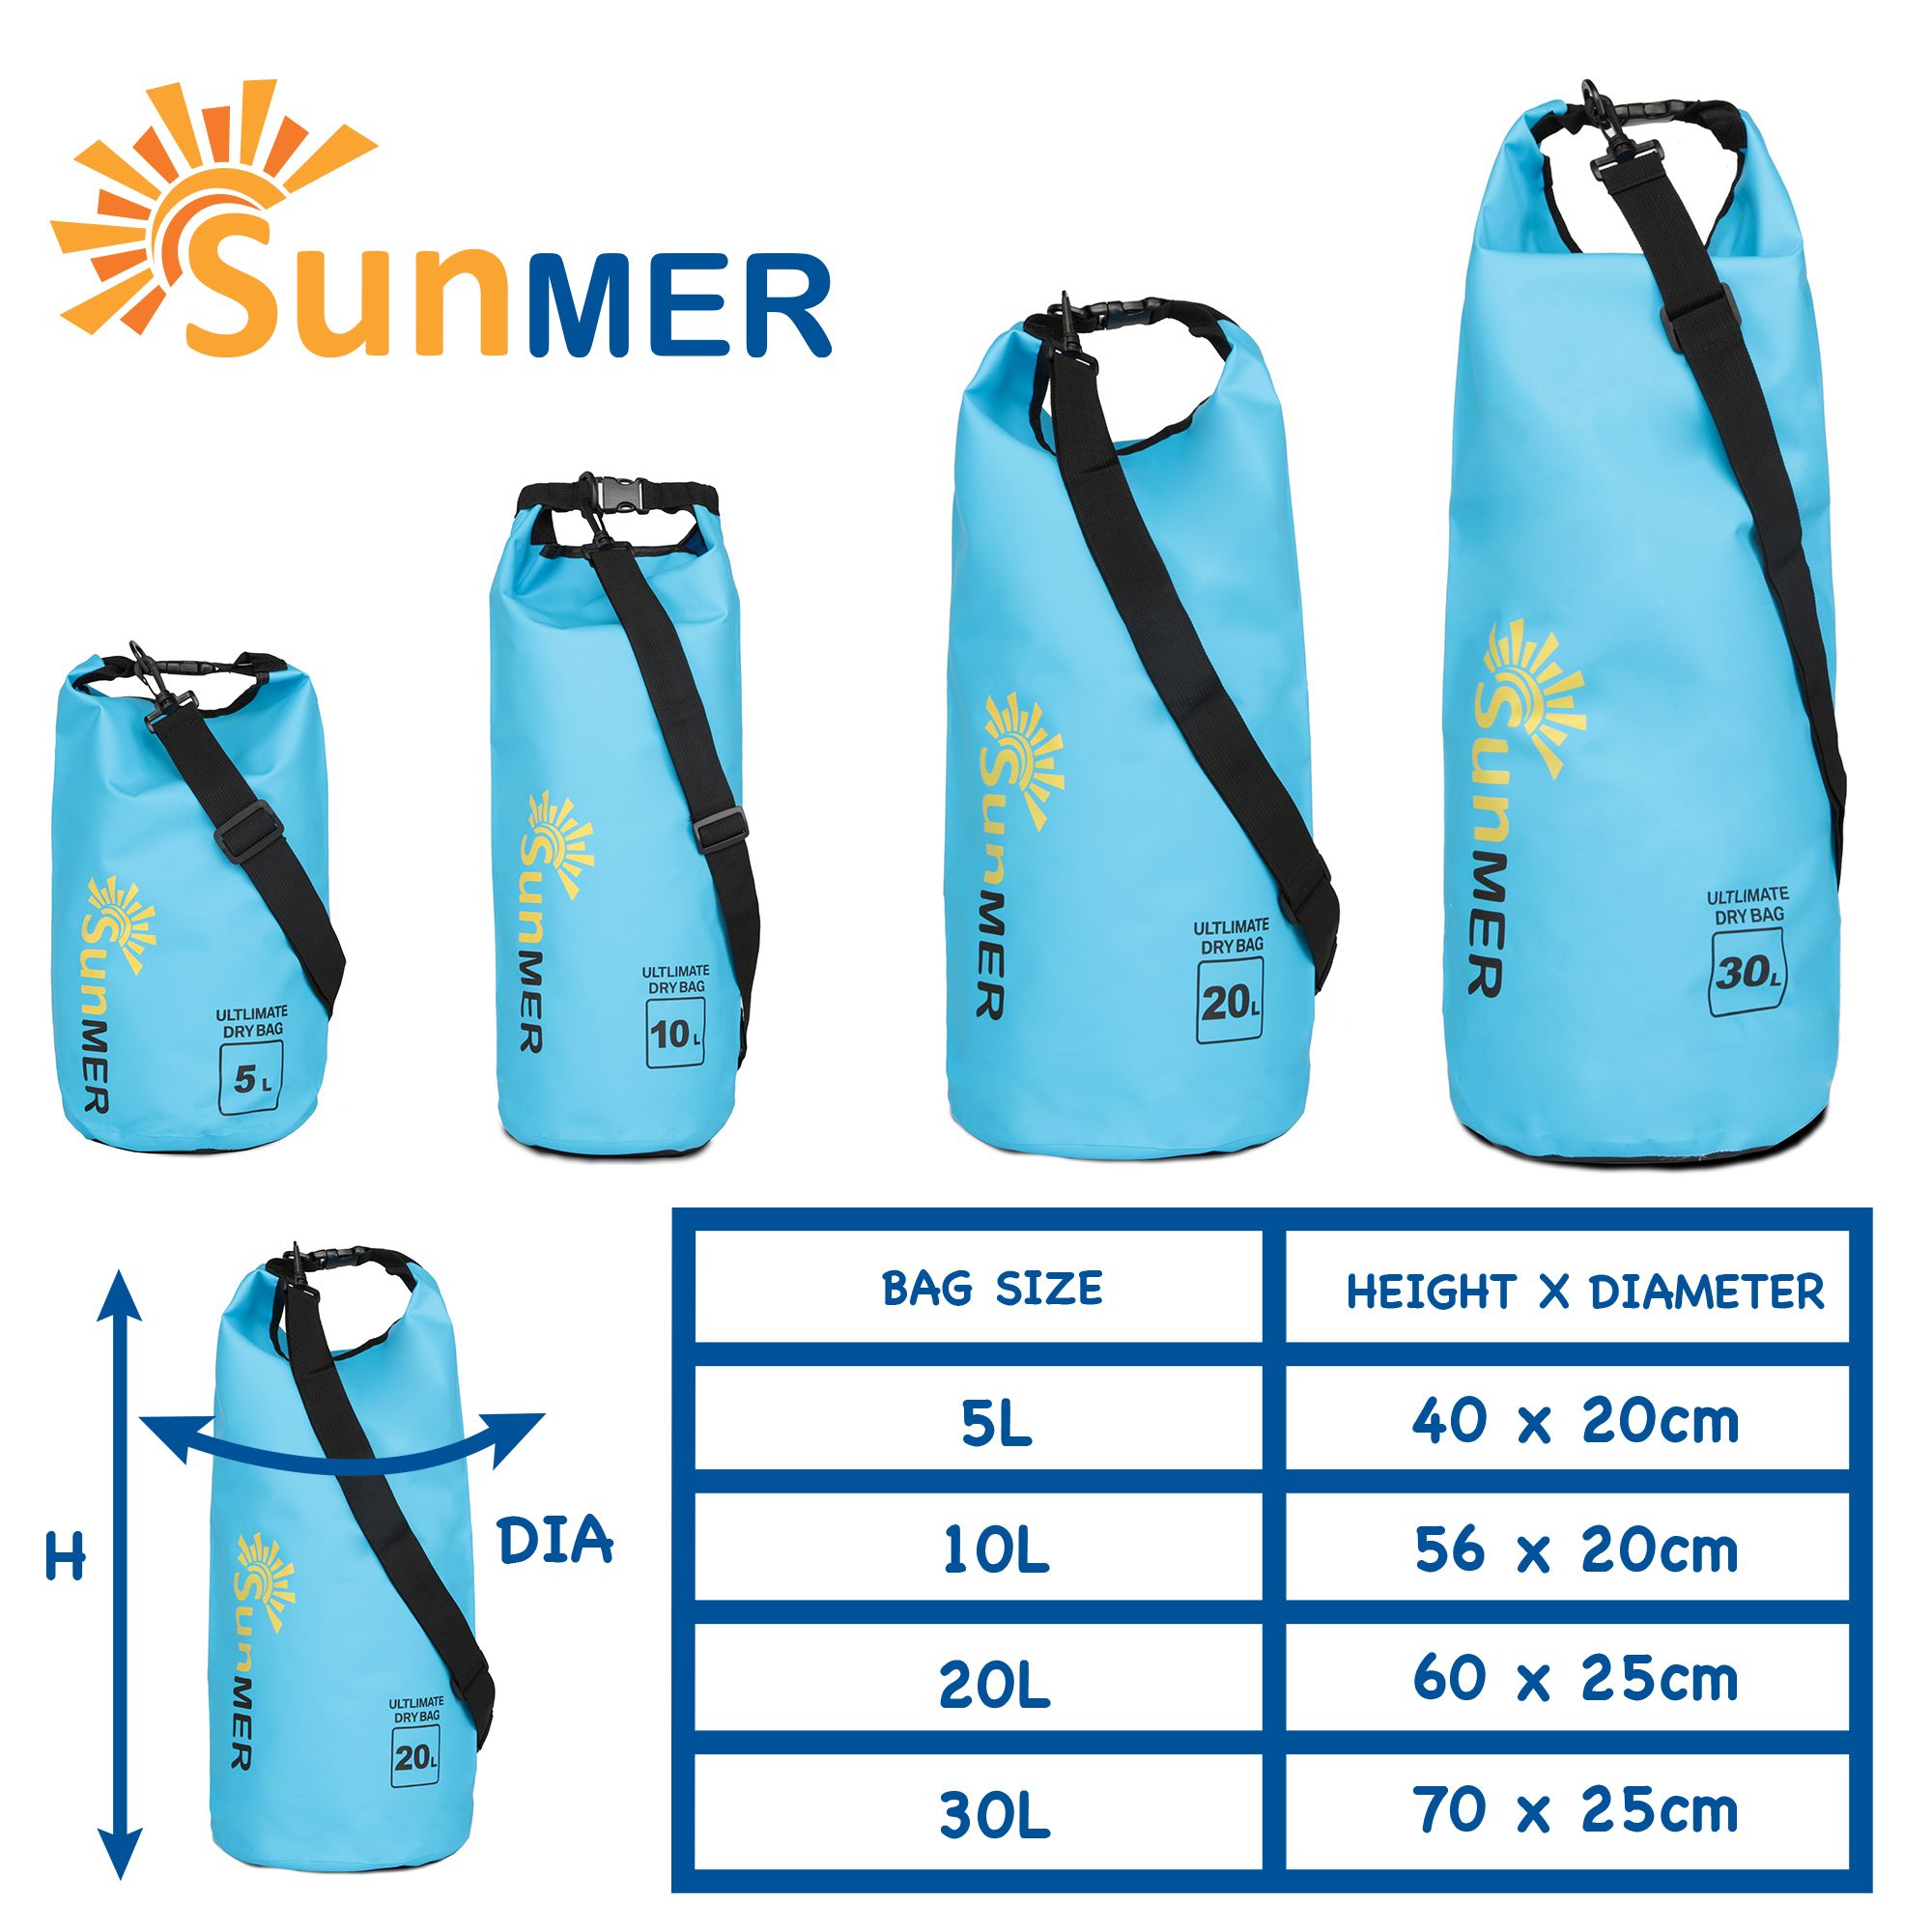 SUNMER 10L Dry Bag With Waterproof Phone Case - Blue